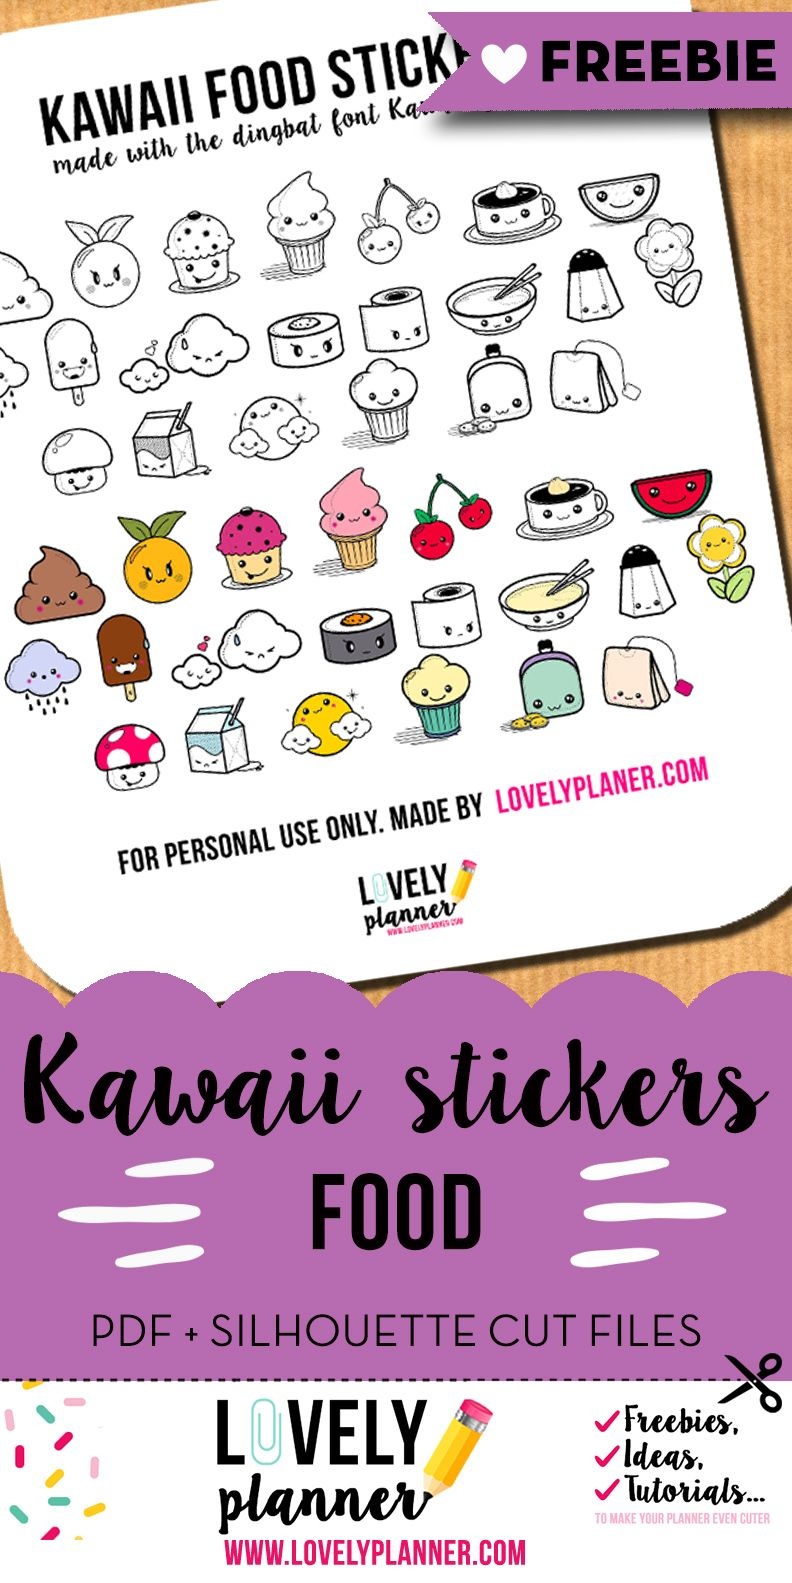 Freebie} Cute Food Stickers For Your Planner | Filofax | Food - Free Printable Kawaii Stickers